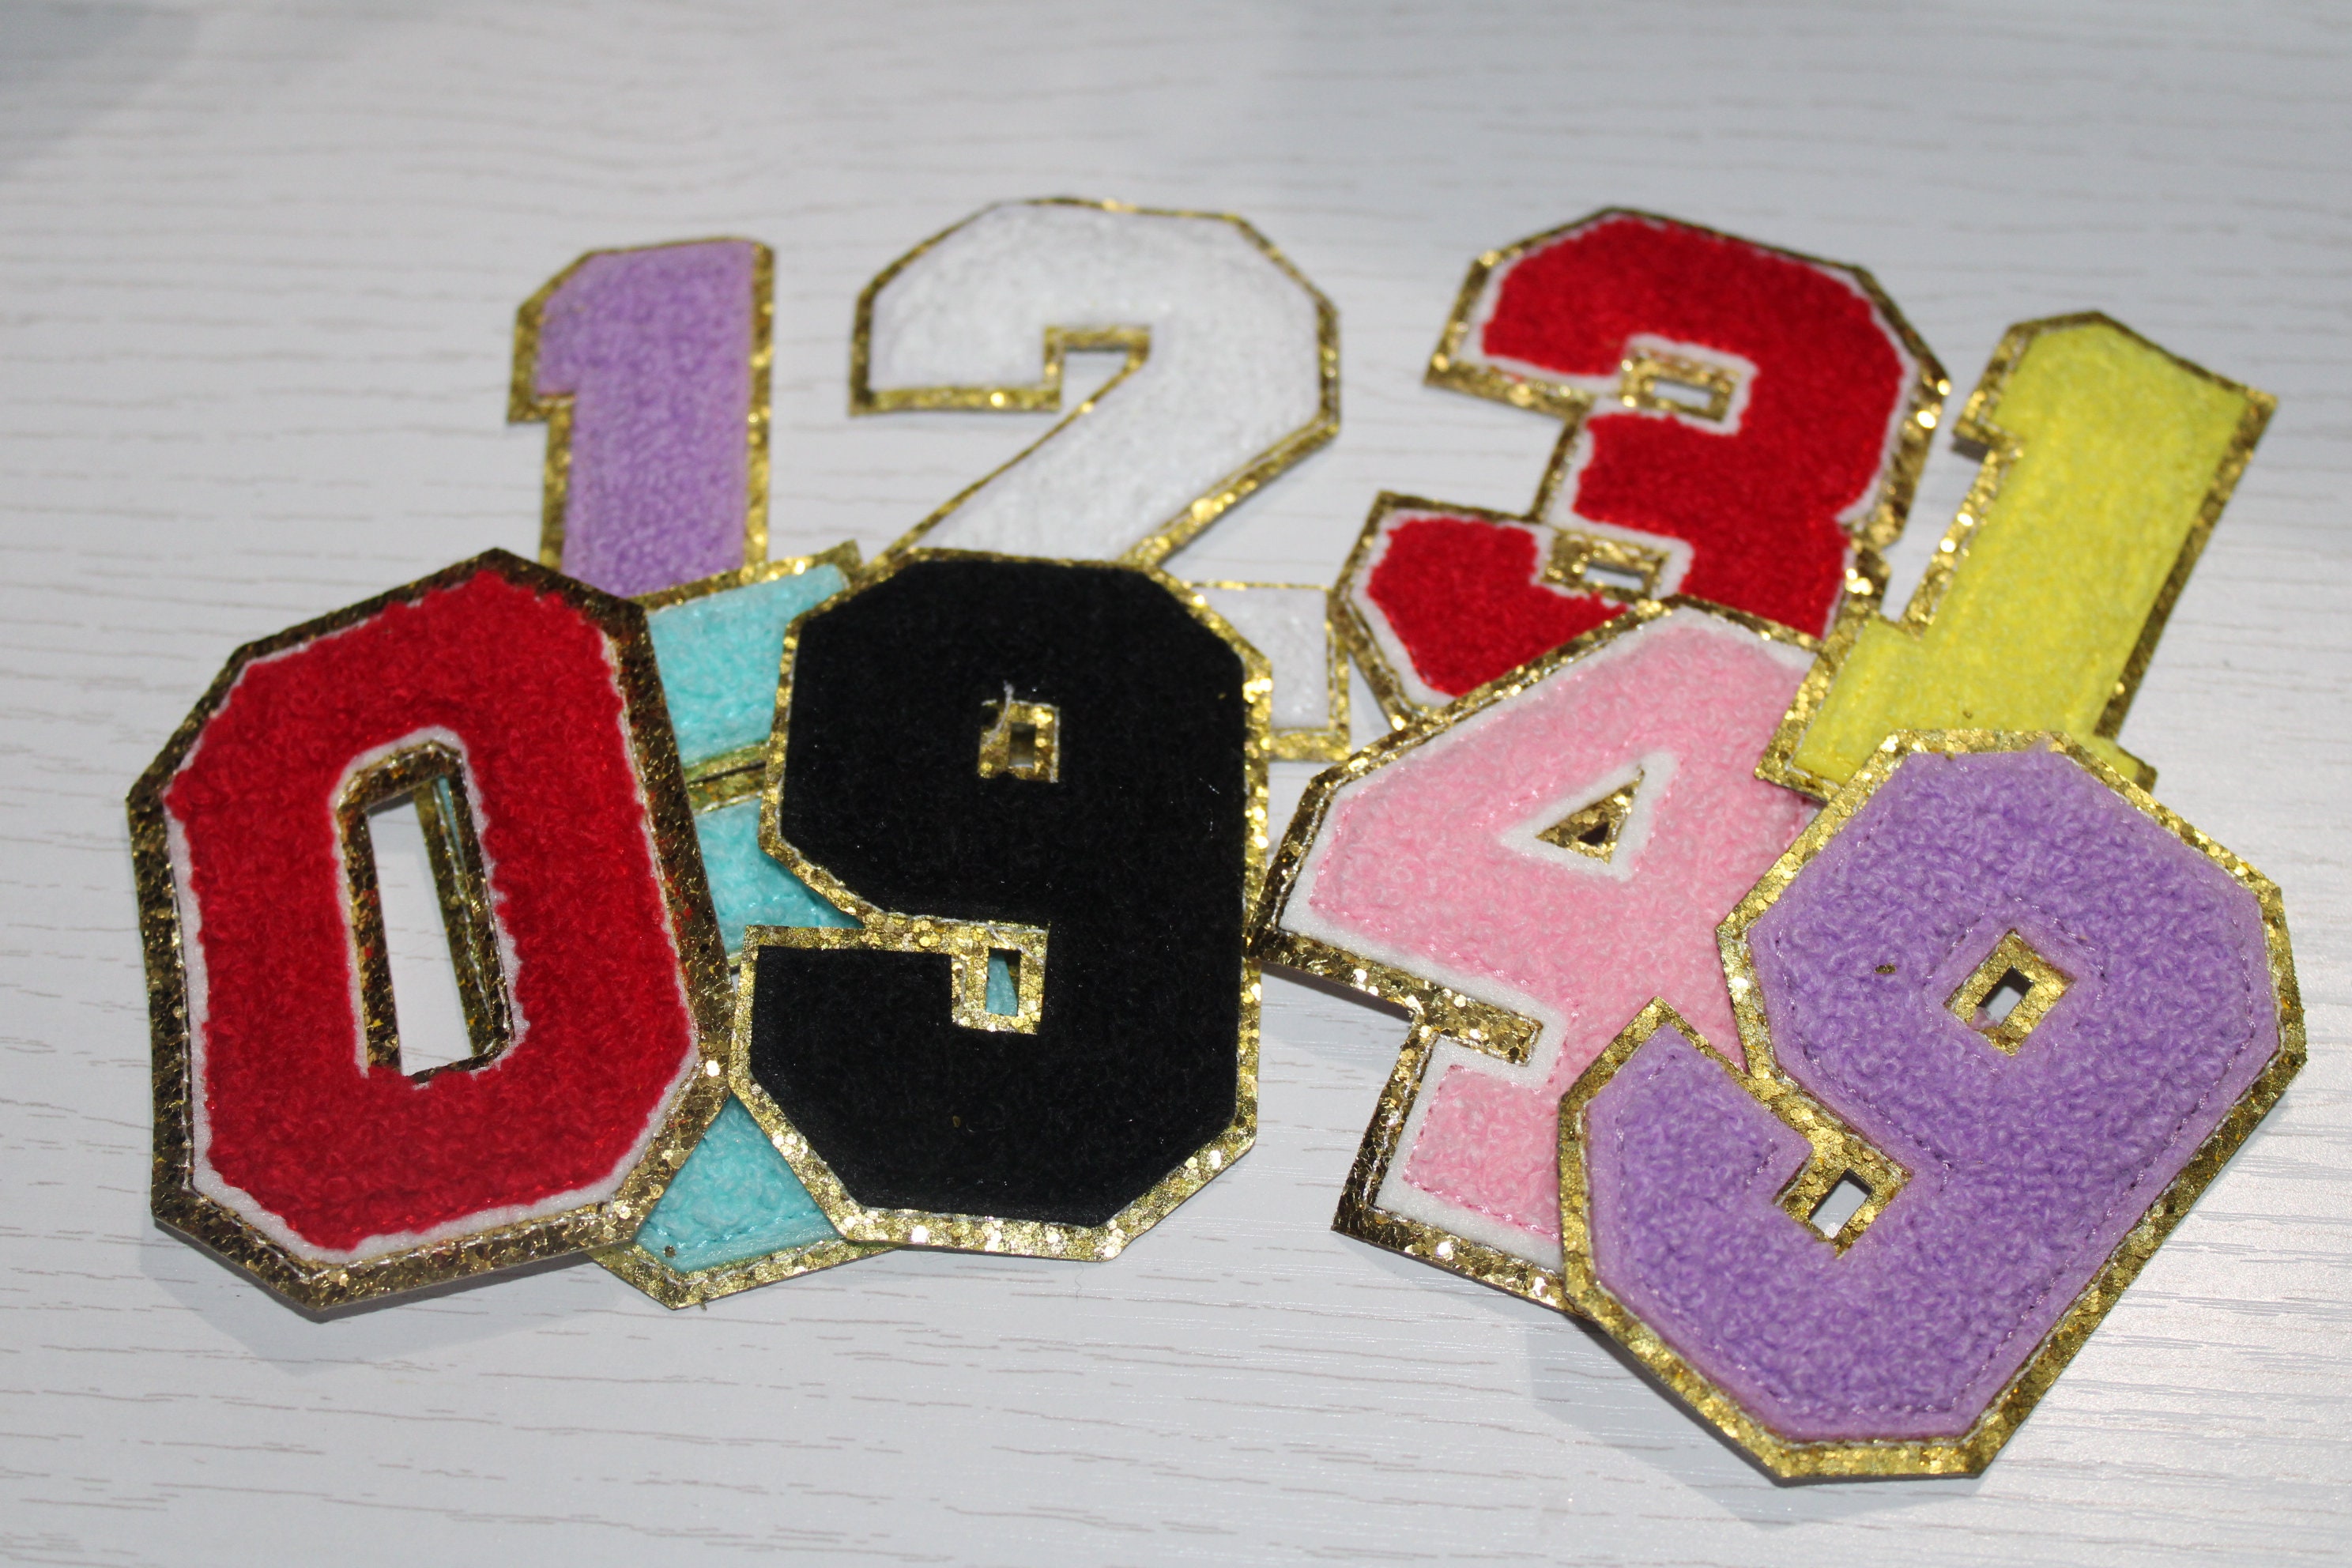 30 Pcs Numbers 0-9 Sew On Patches Iron On Sequin Embroidered Sewing  Appliques for Clothing 